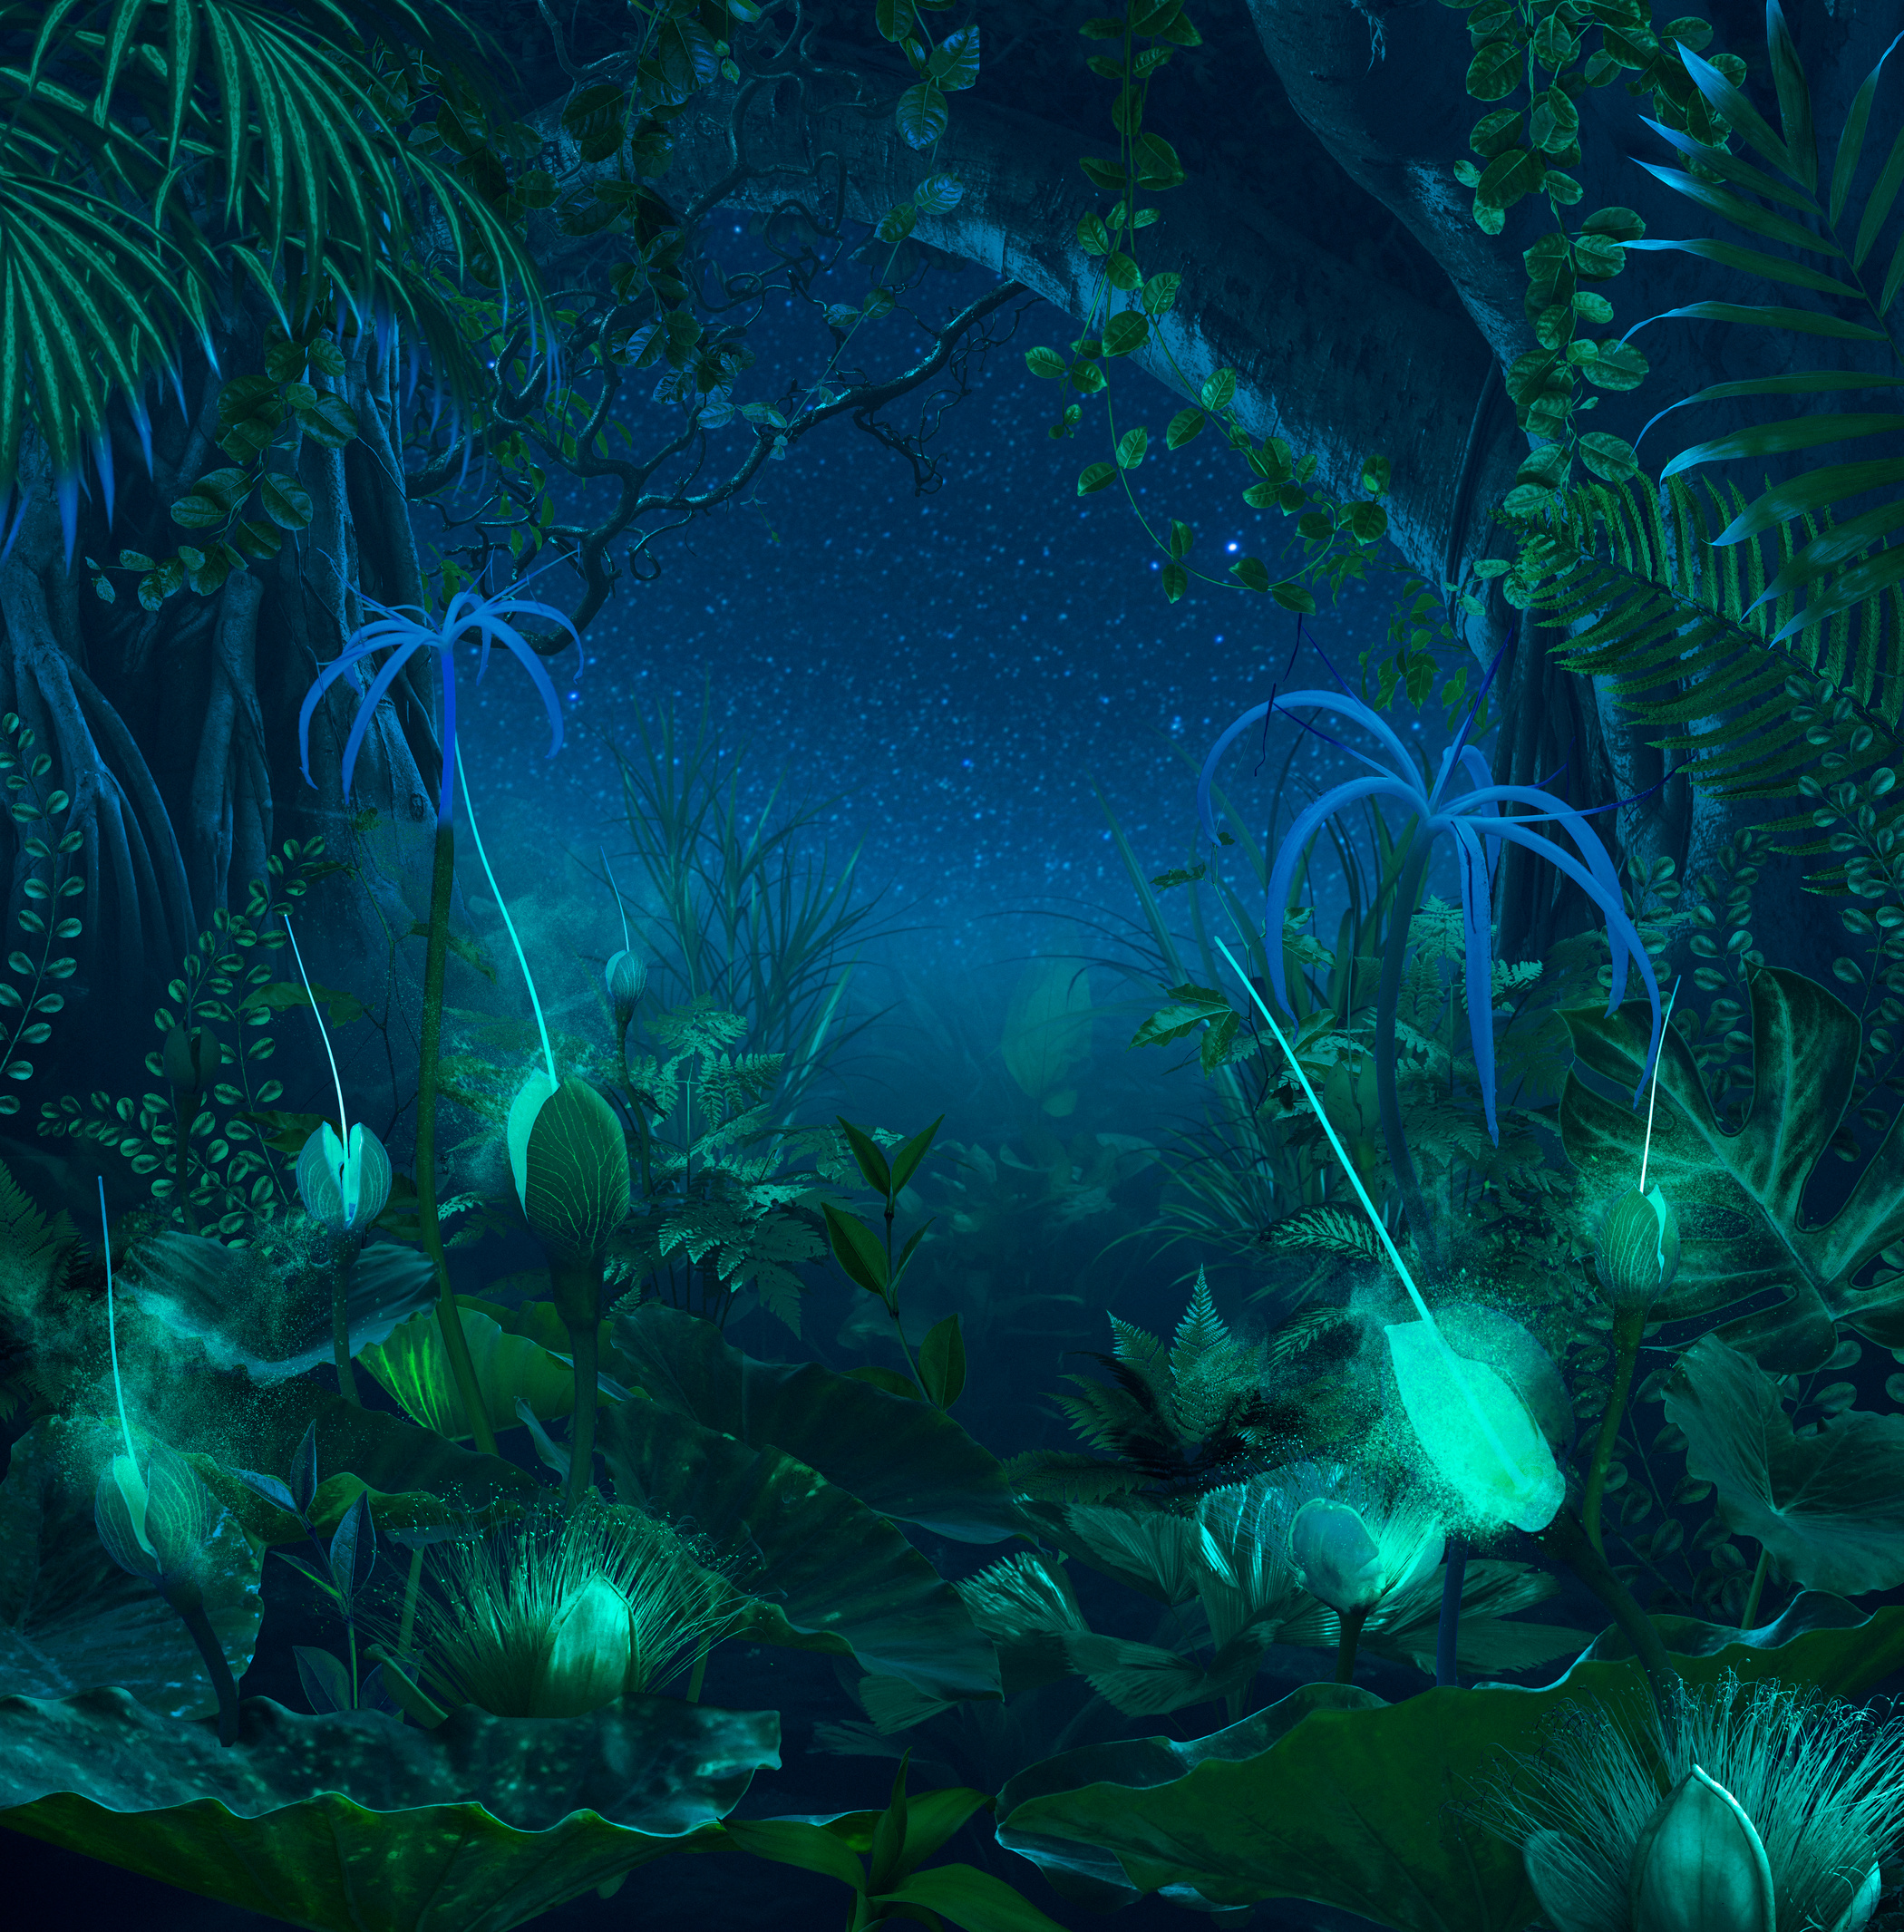 Surreal night jungle with luminescent plants and flowers